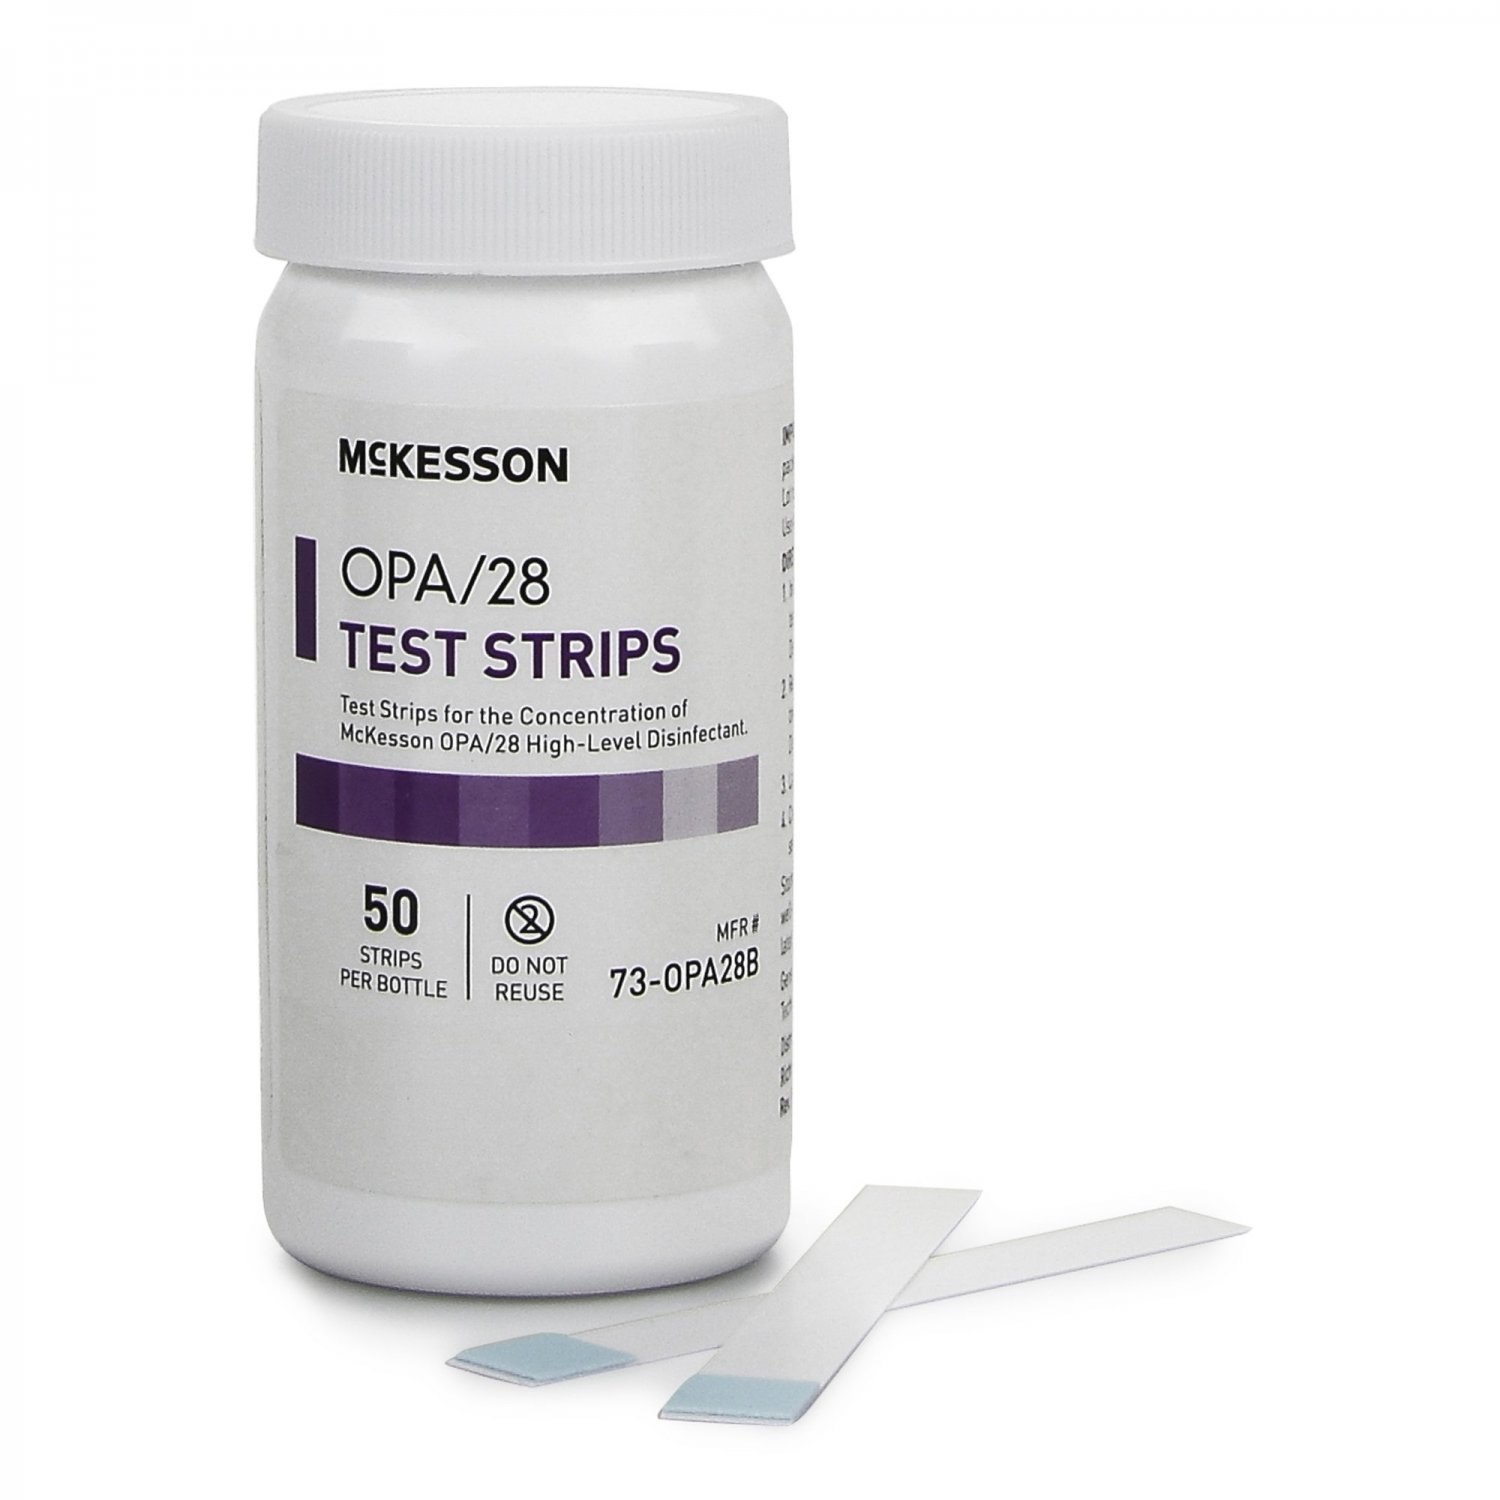 OPA Concentration Indicator McKesson OPA/28 Pad 50 Test Strips Bottle Single Use | 73-OPA28B